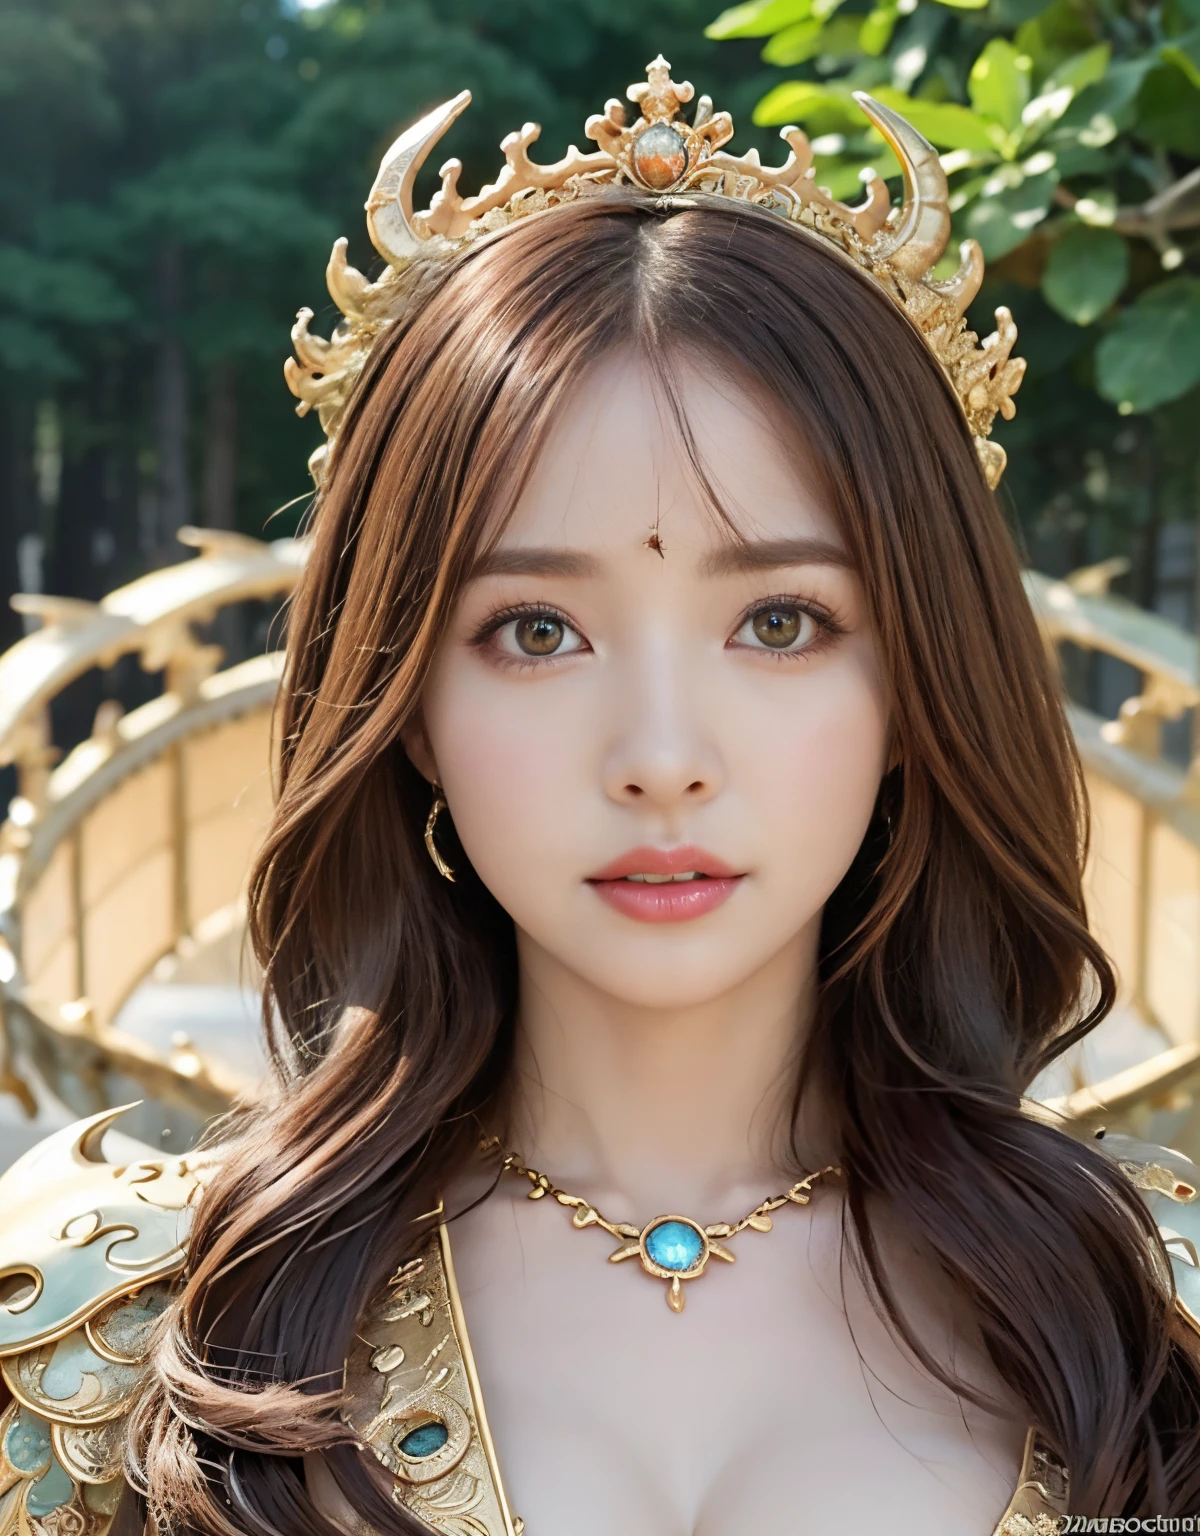 (Fight fiercely with dragons)、top-quality、​masterpiece、超A high resolution、（White Dragon Armor）、(((Colossal tits))),dragon armor、(Wearing a beautiful crown made of jewels),(Photorealsitic:1.4)、Raw photo、女の子1人、Golden hair、((Floral hair ornament))),glowy skin、(((Chinese Dragon)))、（Gorgeous Jewelry Necklaces）、Natural remainystical expression）、（Full Body Angle）、（Fight big dragons）、With a beautiful knife、(((Mansuji))),（Pink Metal Bikini）、(beautiful forest background)、Precipitous cliffs、(Castle background)、((super realistic details))、portlate、globalillumination、（sexypose）、Shadow、octan render、（One-Eyed Scouter）、8K、ultrasharp、Colossal 、Raw skin is exposed in cleavage、metals、Details of complex ornaments、Japan details、highly intricate detail、Realistic light、CGSoation Trends、Blue eyes、radiant eyes、Facing the camera、Precipitous cliffs、Toostock、（Full Body Angle）、（veils）、(((Heavy Big))),